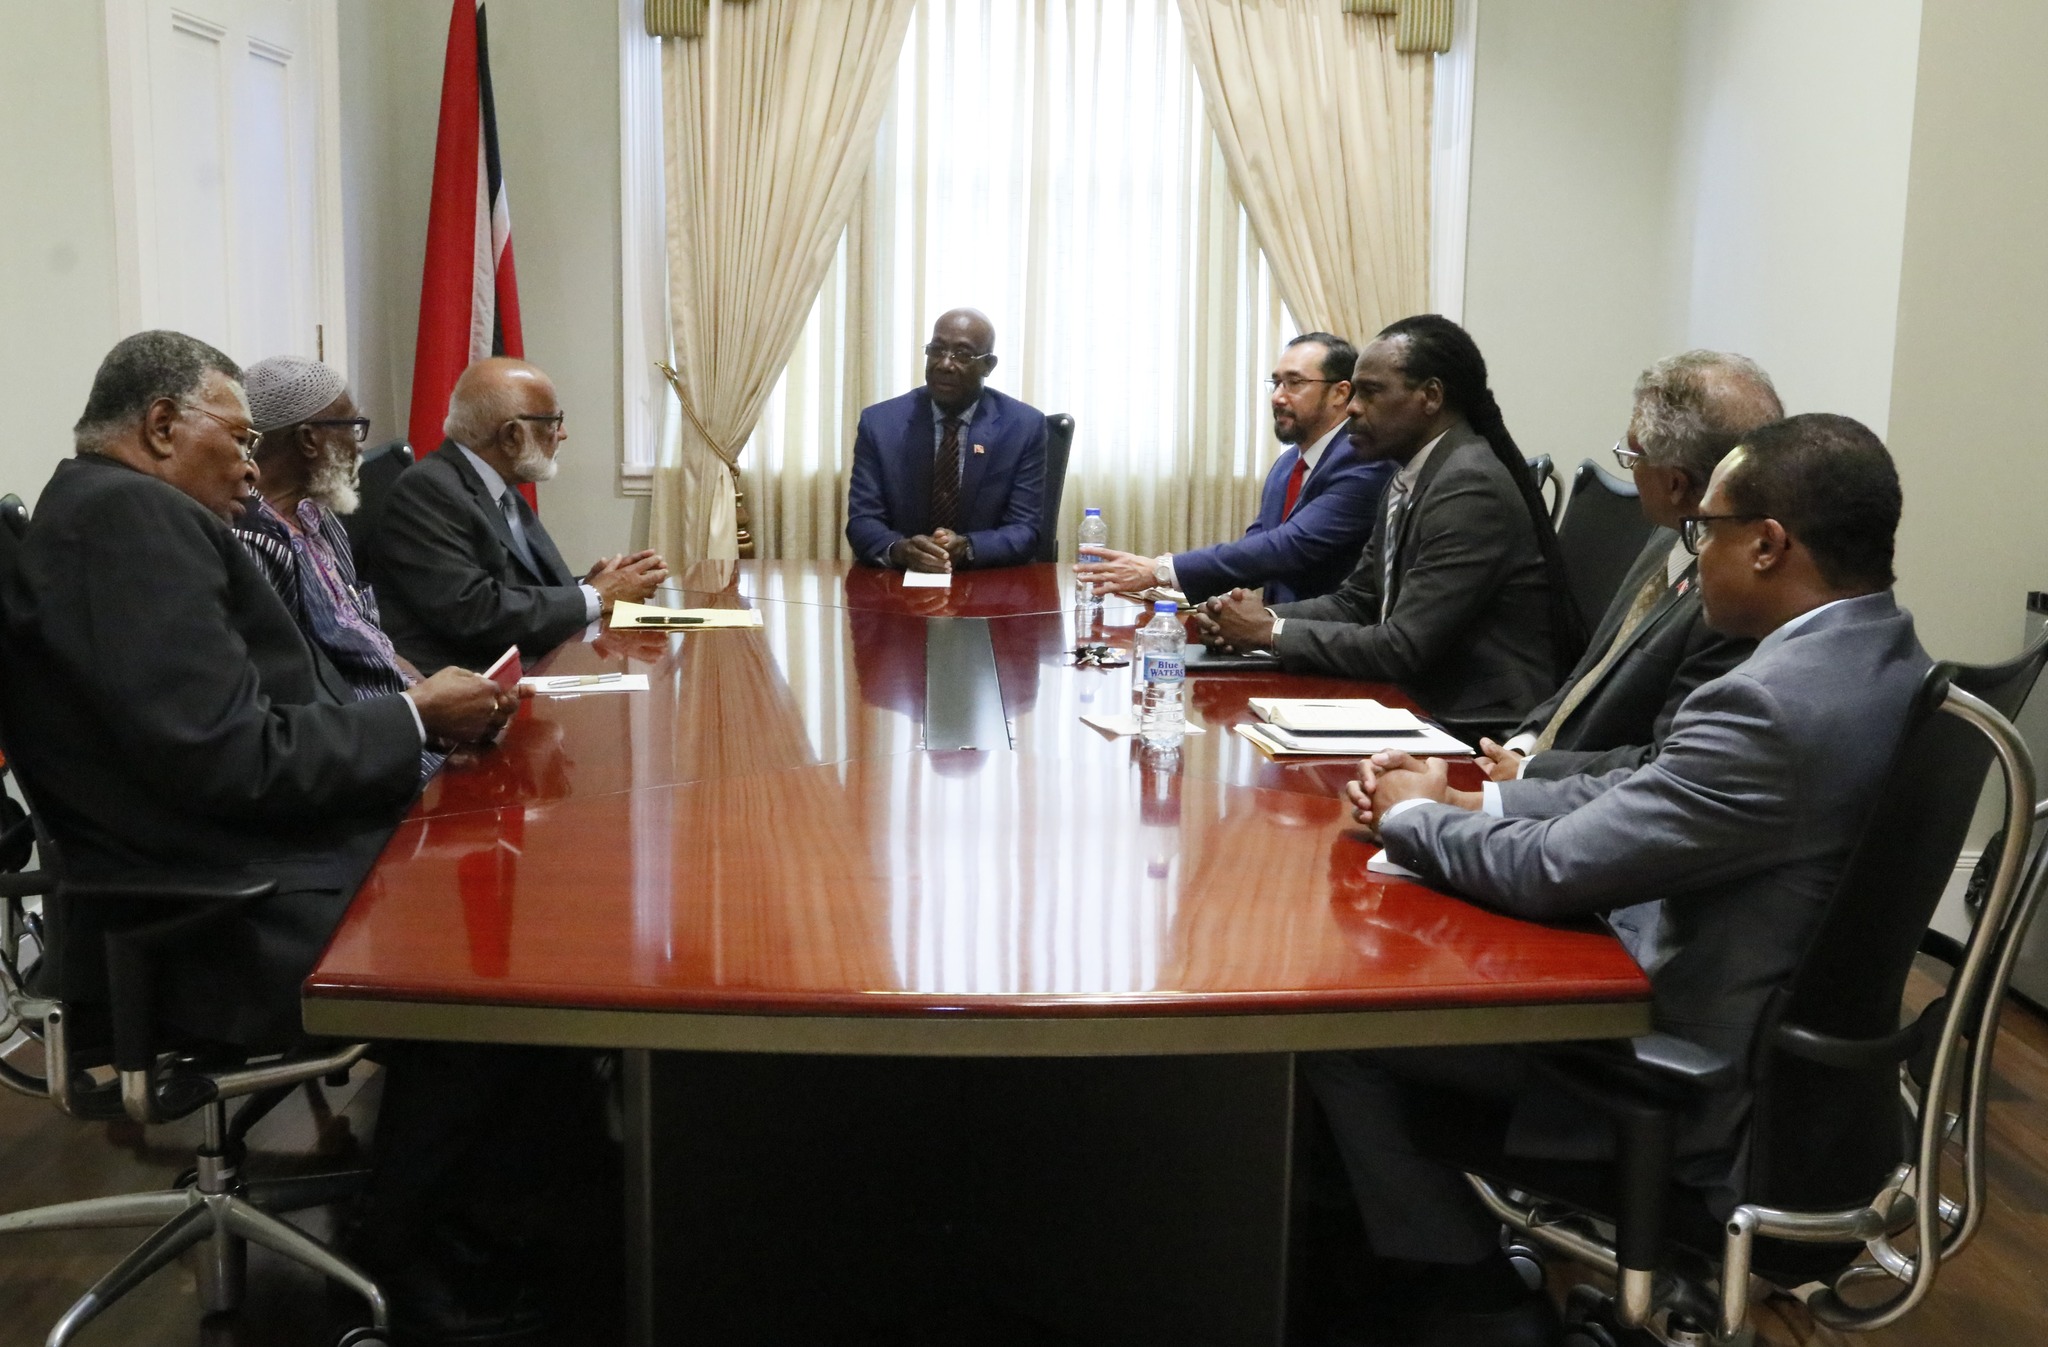 Prime Minister met with Nizam Mohammed on stranded nationals in conflict zones